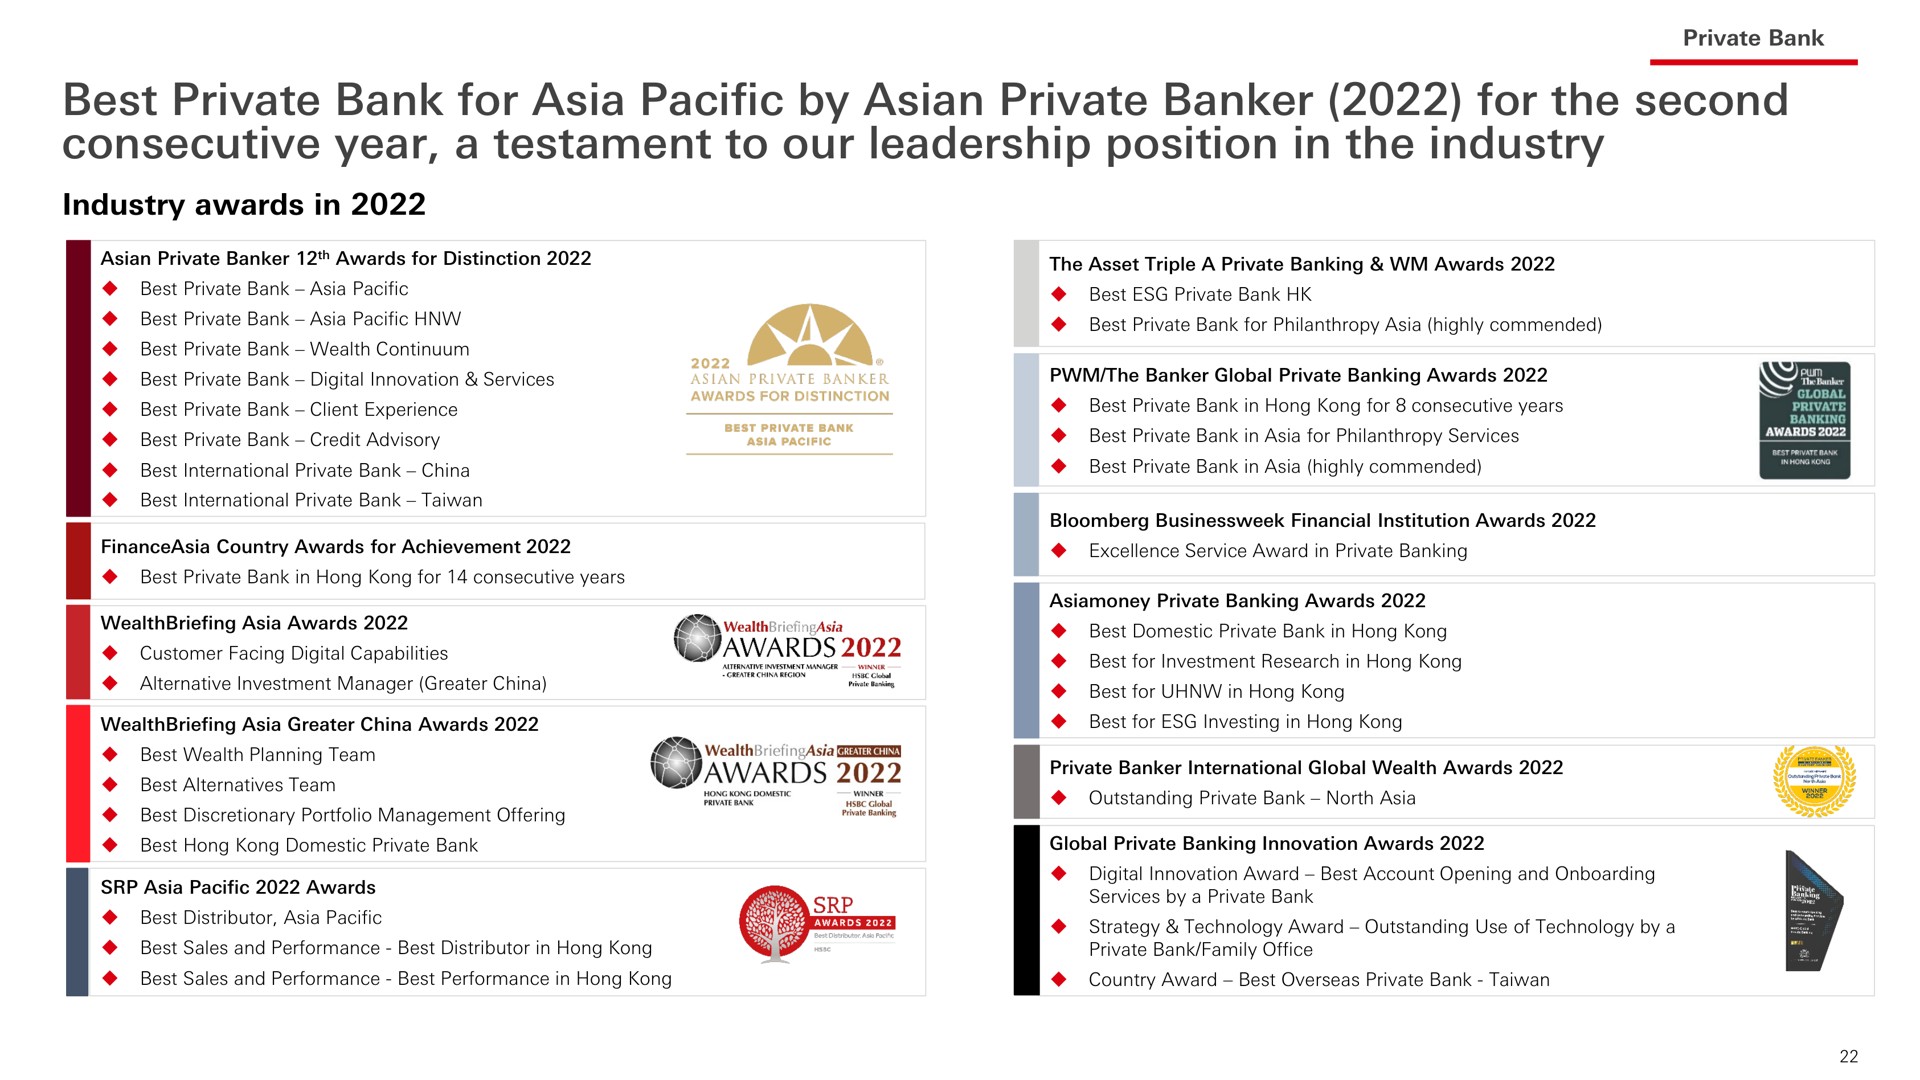 best private bank for pacific by private banker for the second consecutive year a testament to our leadership position in the industry | HSBC